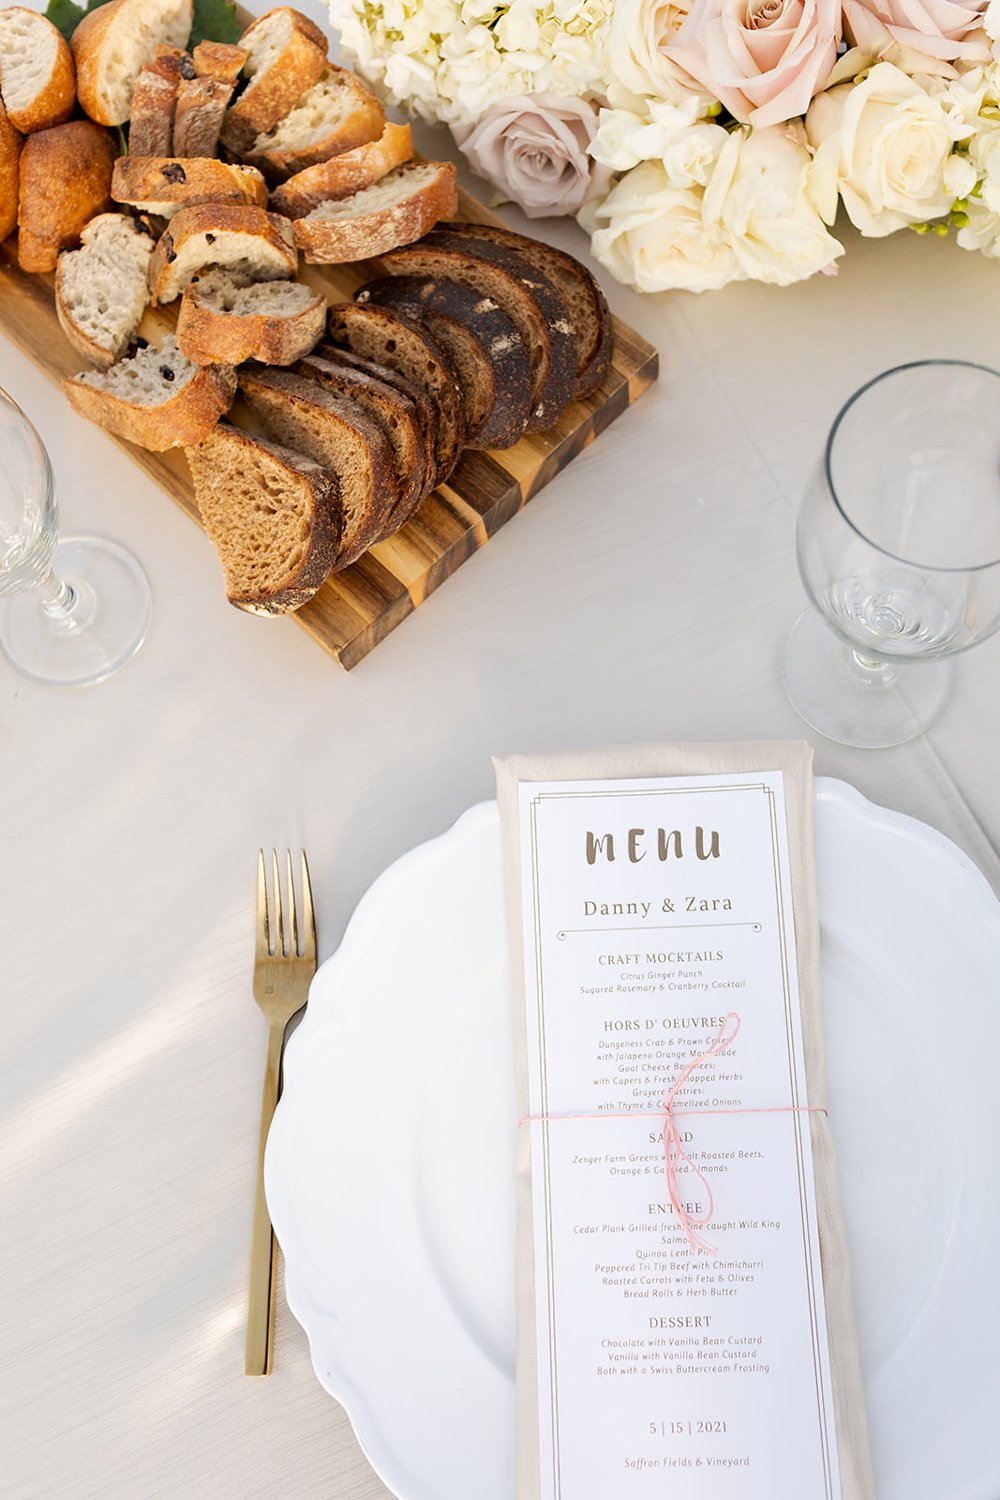 spring style wedding table settings with sliced artisan breads and menu by art de cuisine